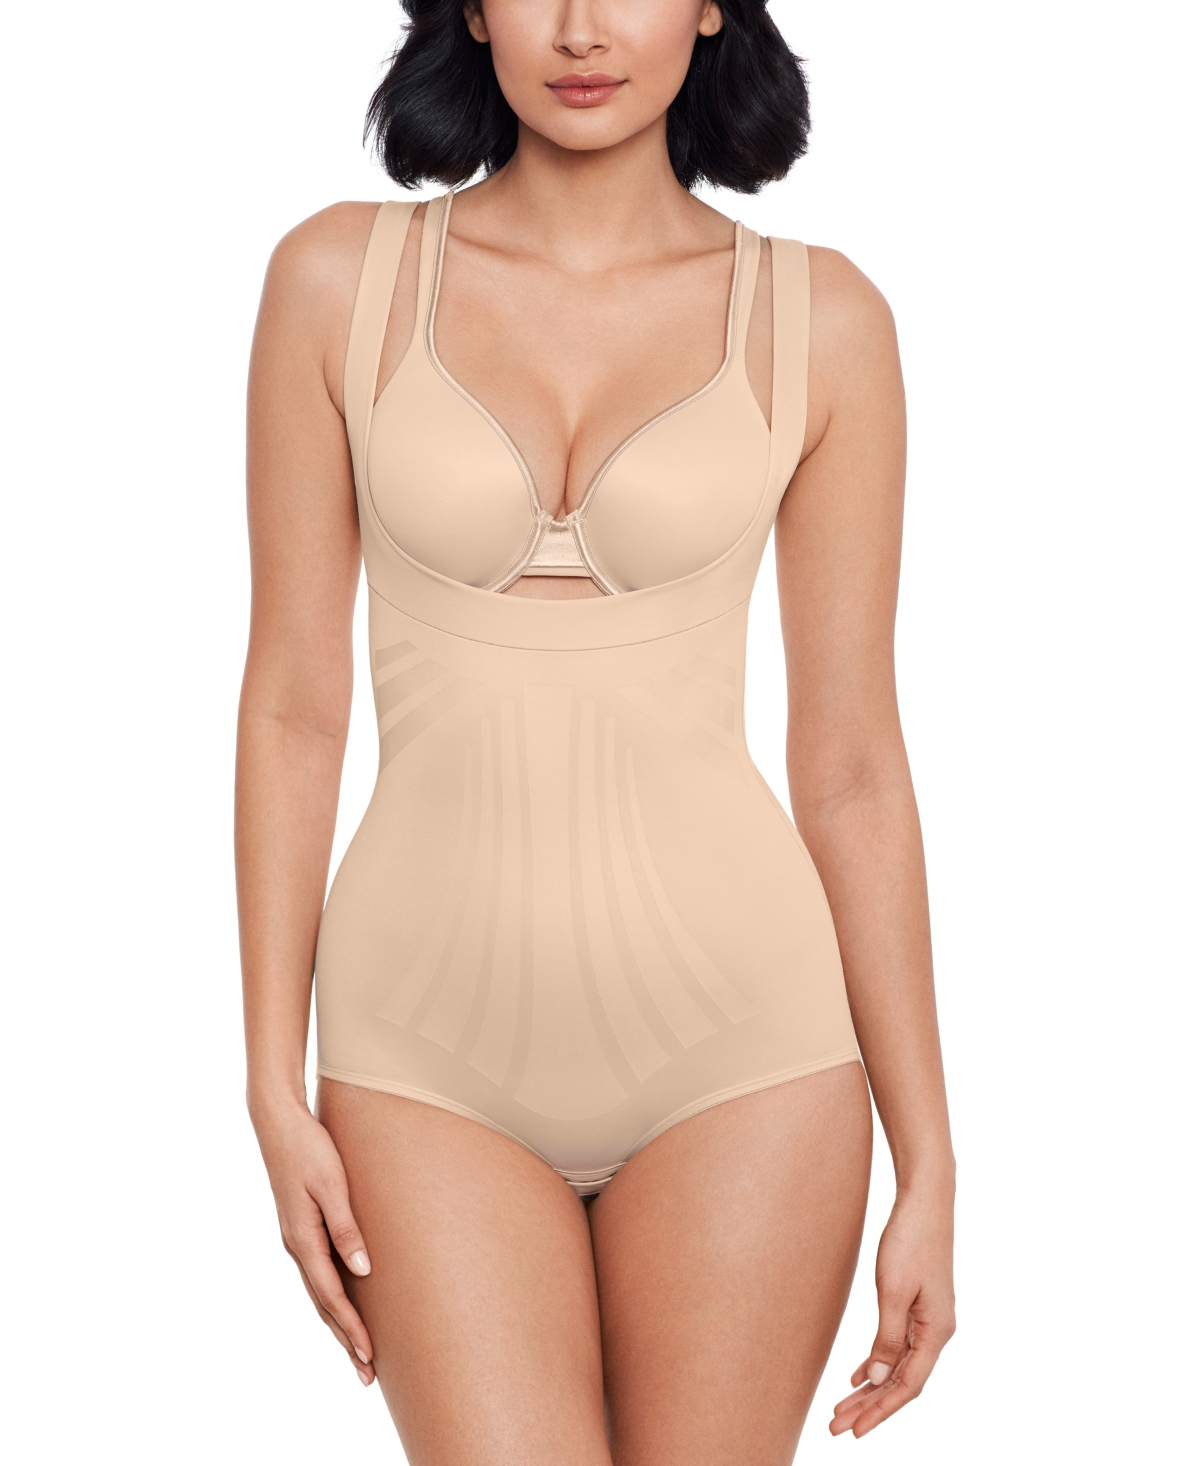 MIRACLESUIT Women's Comfy Curves Hi-Waist Thigh Slimmer Shapewear 2519